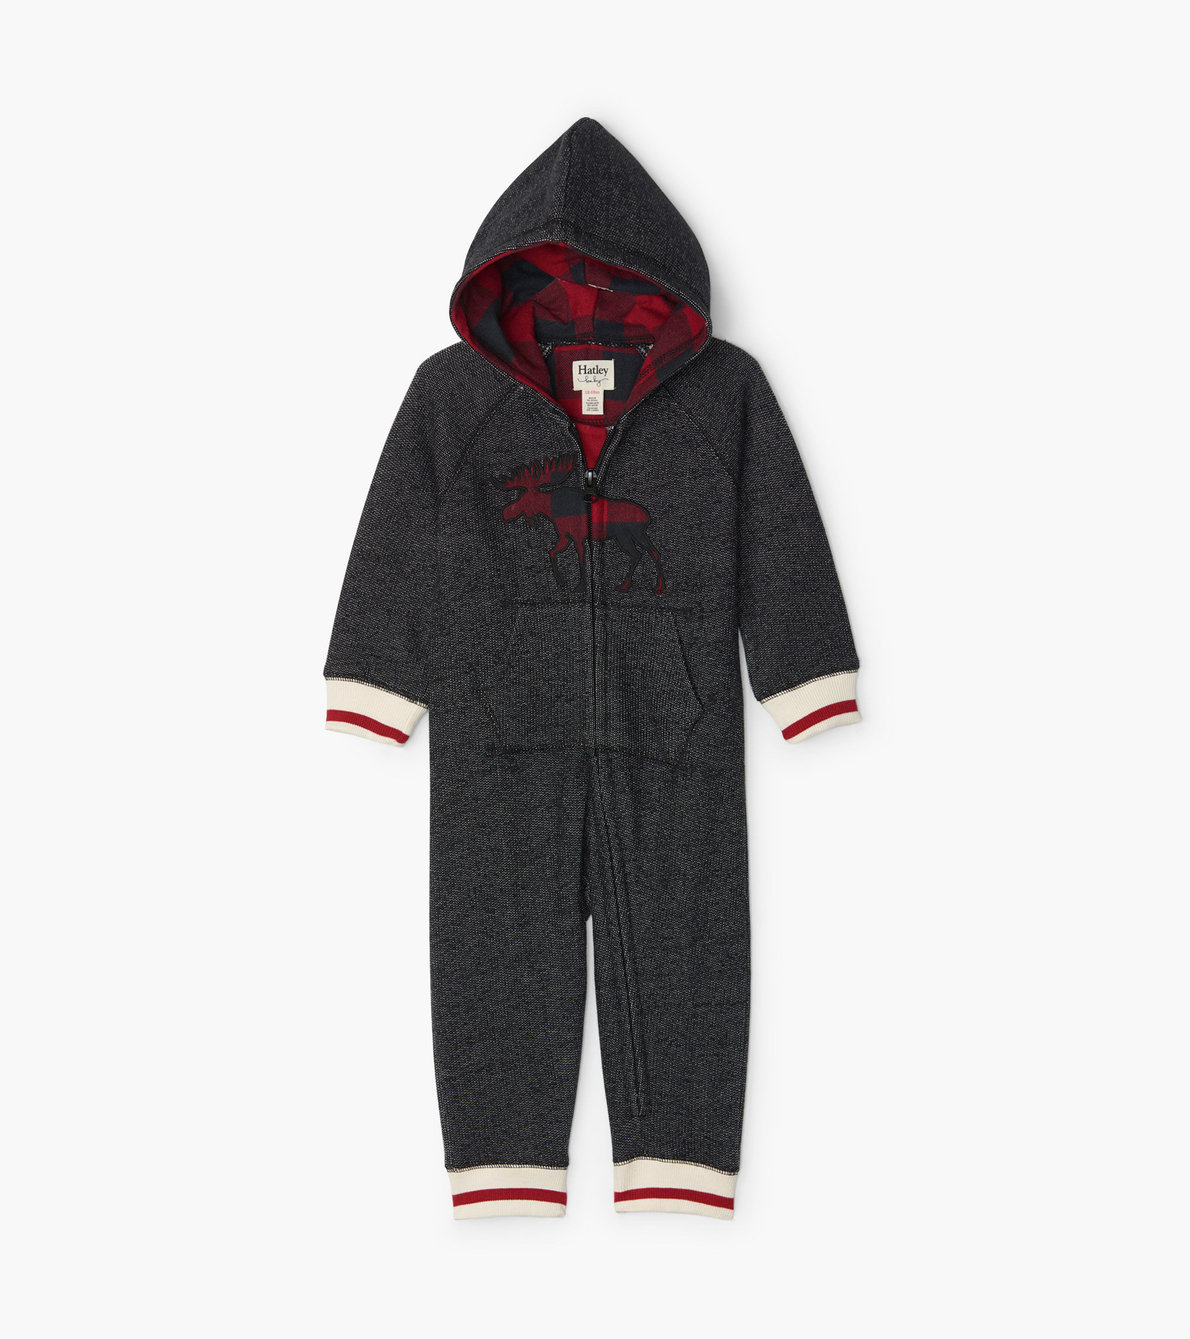 View larger image of Buffalo Plaid Moose Baby Heritage Hooded Romper